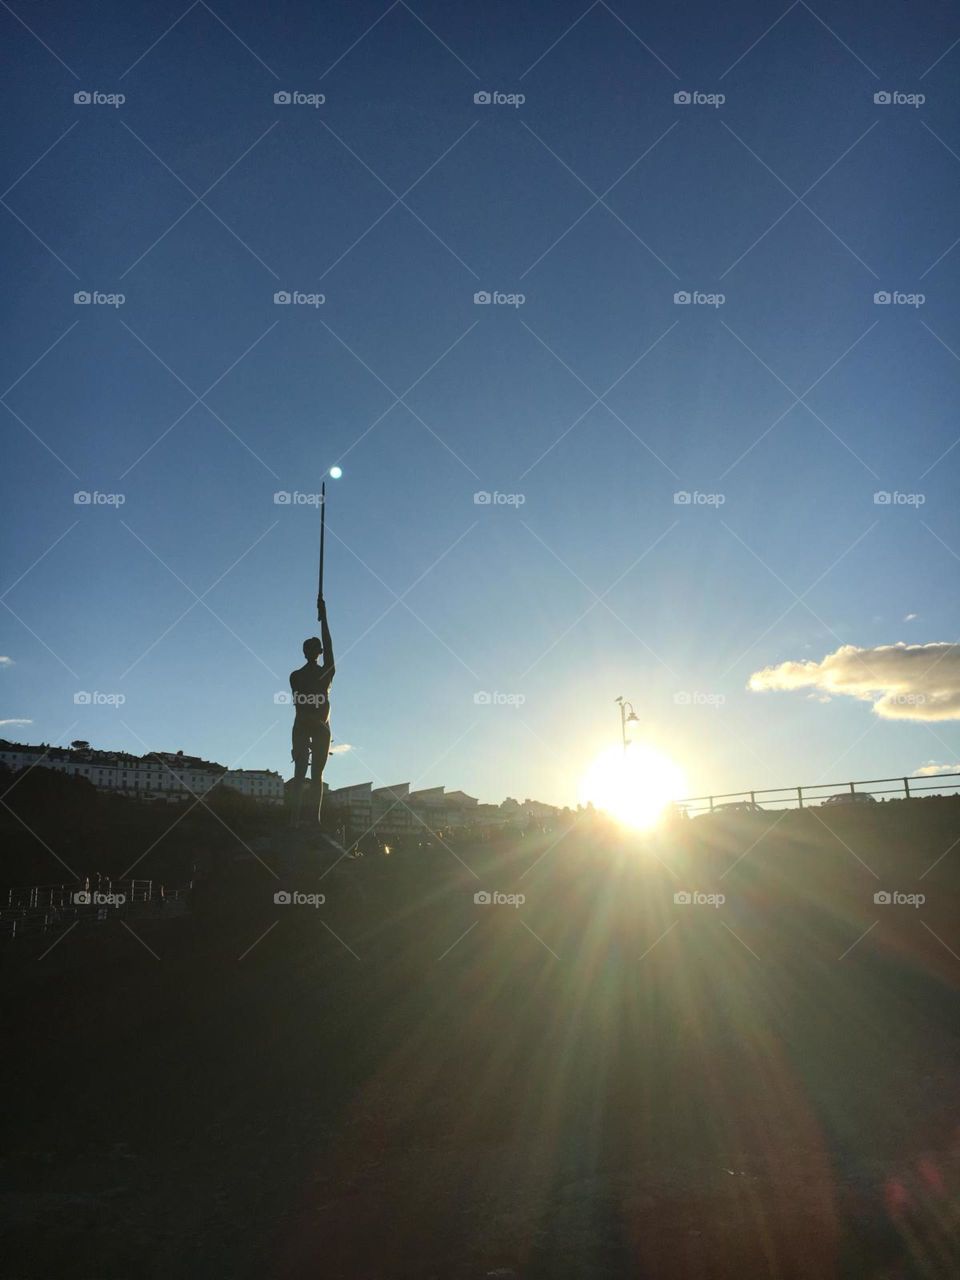 Beautiful image capturing Damien Hirst’s Verity statue in Ilfracombe, Devon. Shows sunset and moon on the tip of Verity’s sword. 